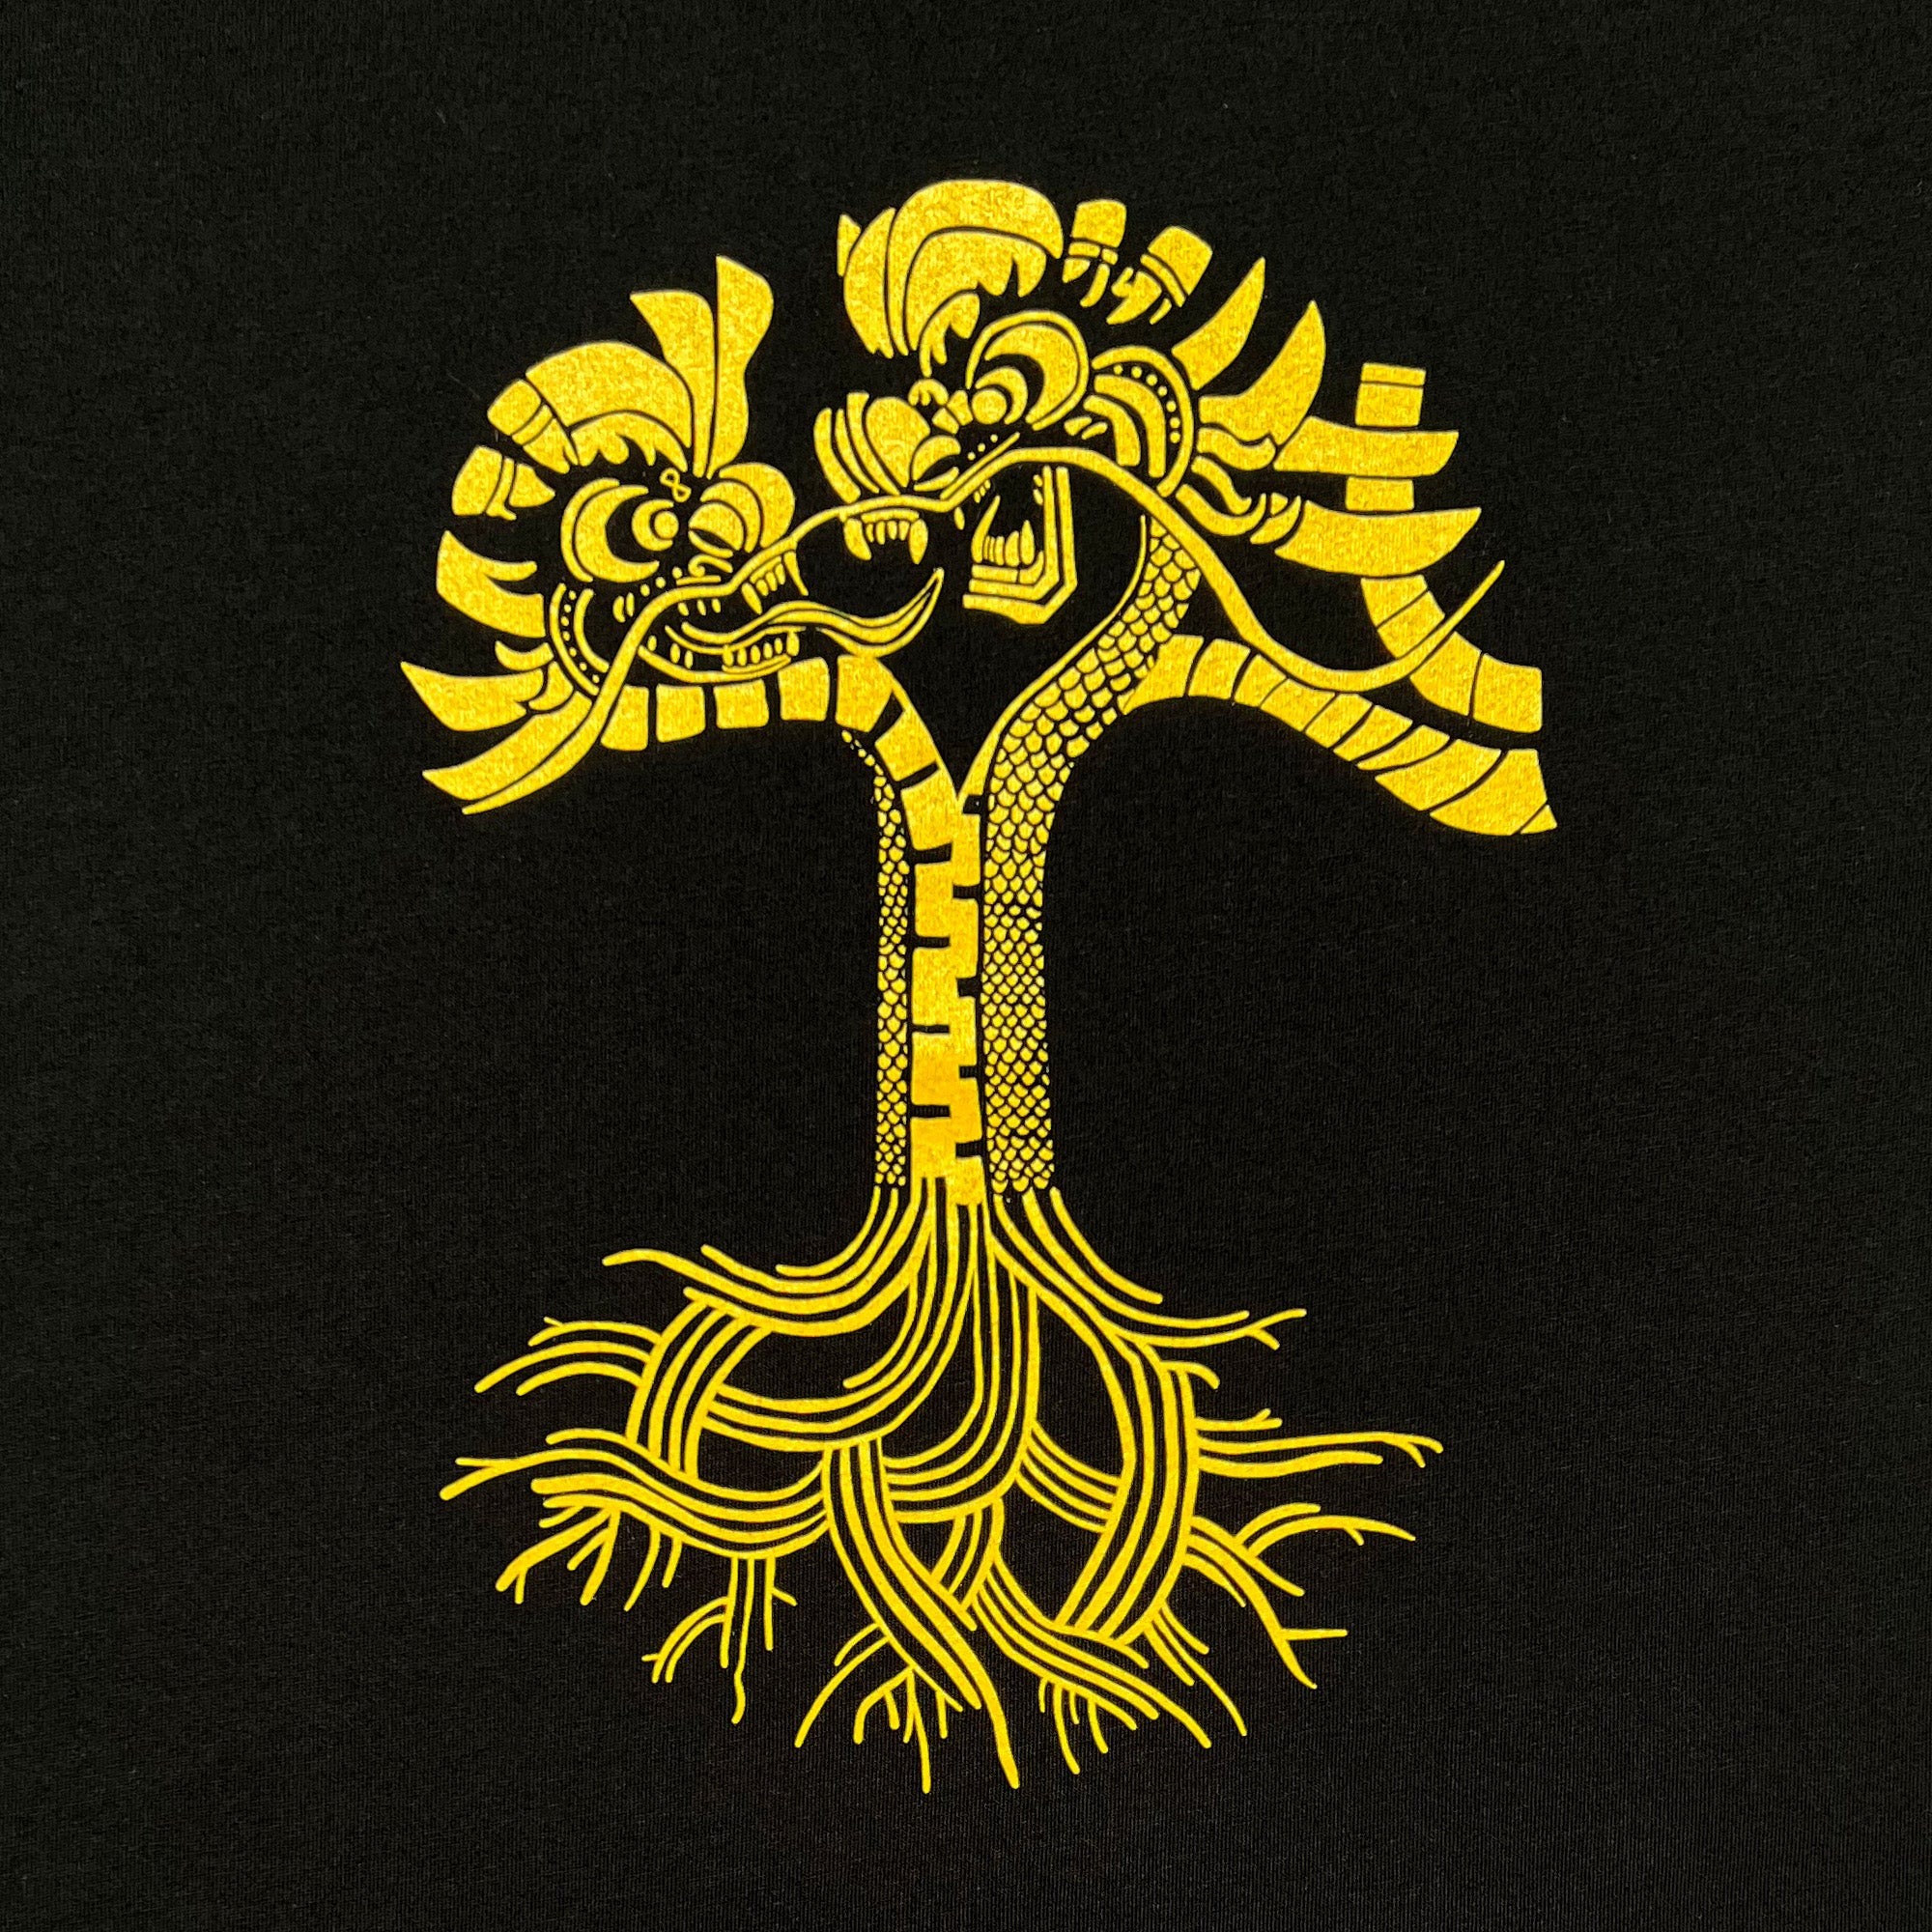 Close-up of gold dragon power design shaped like an Oaklandish tree logo on a black youth-sized t-shirt.